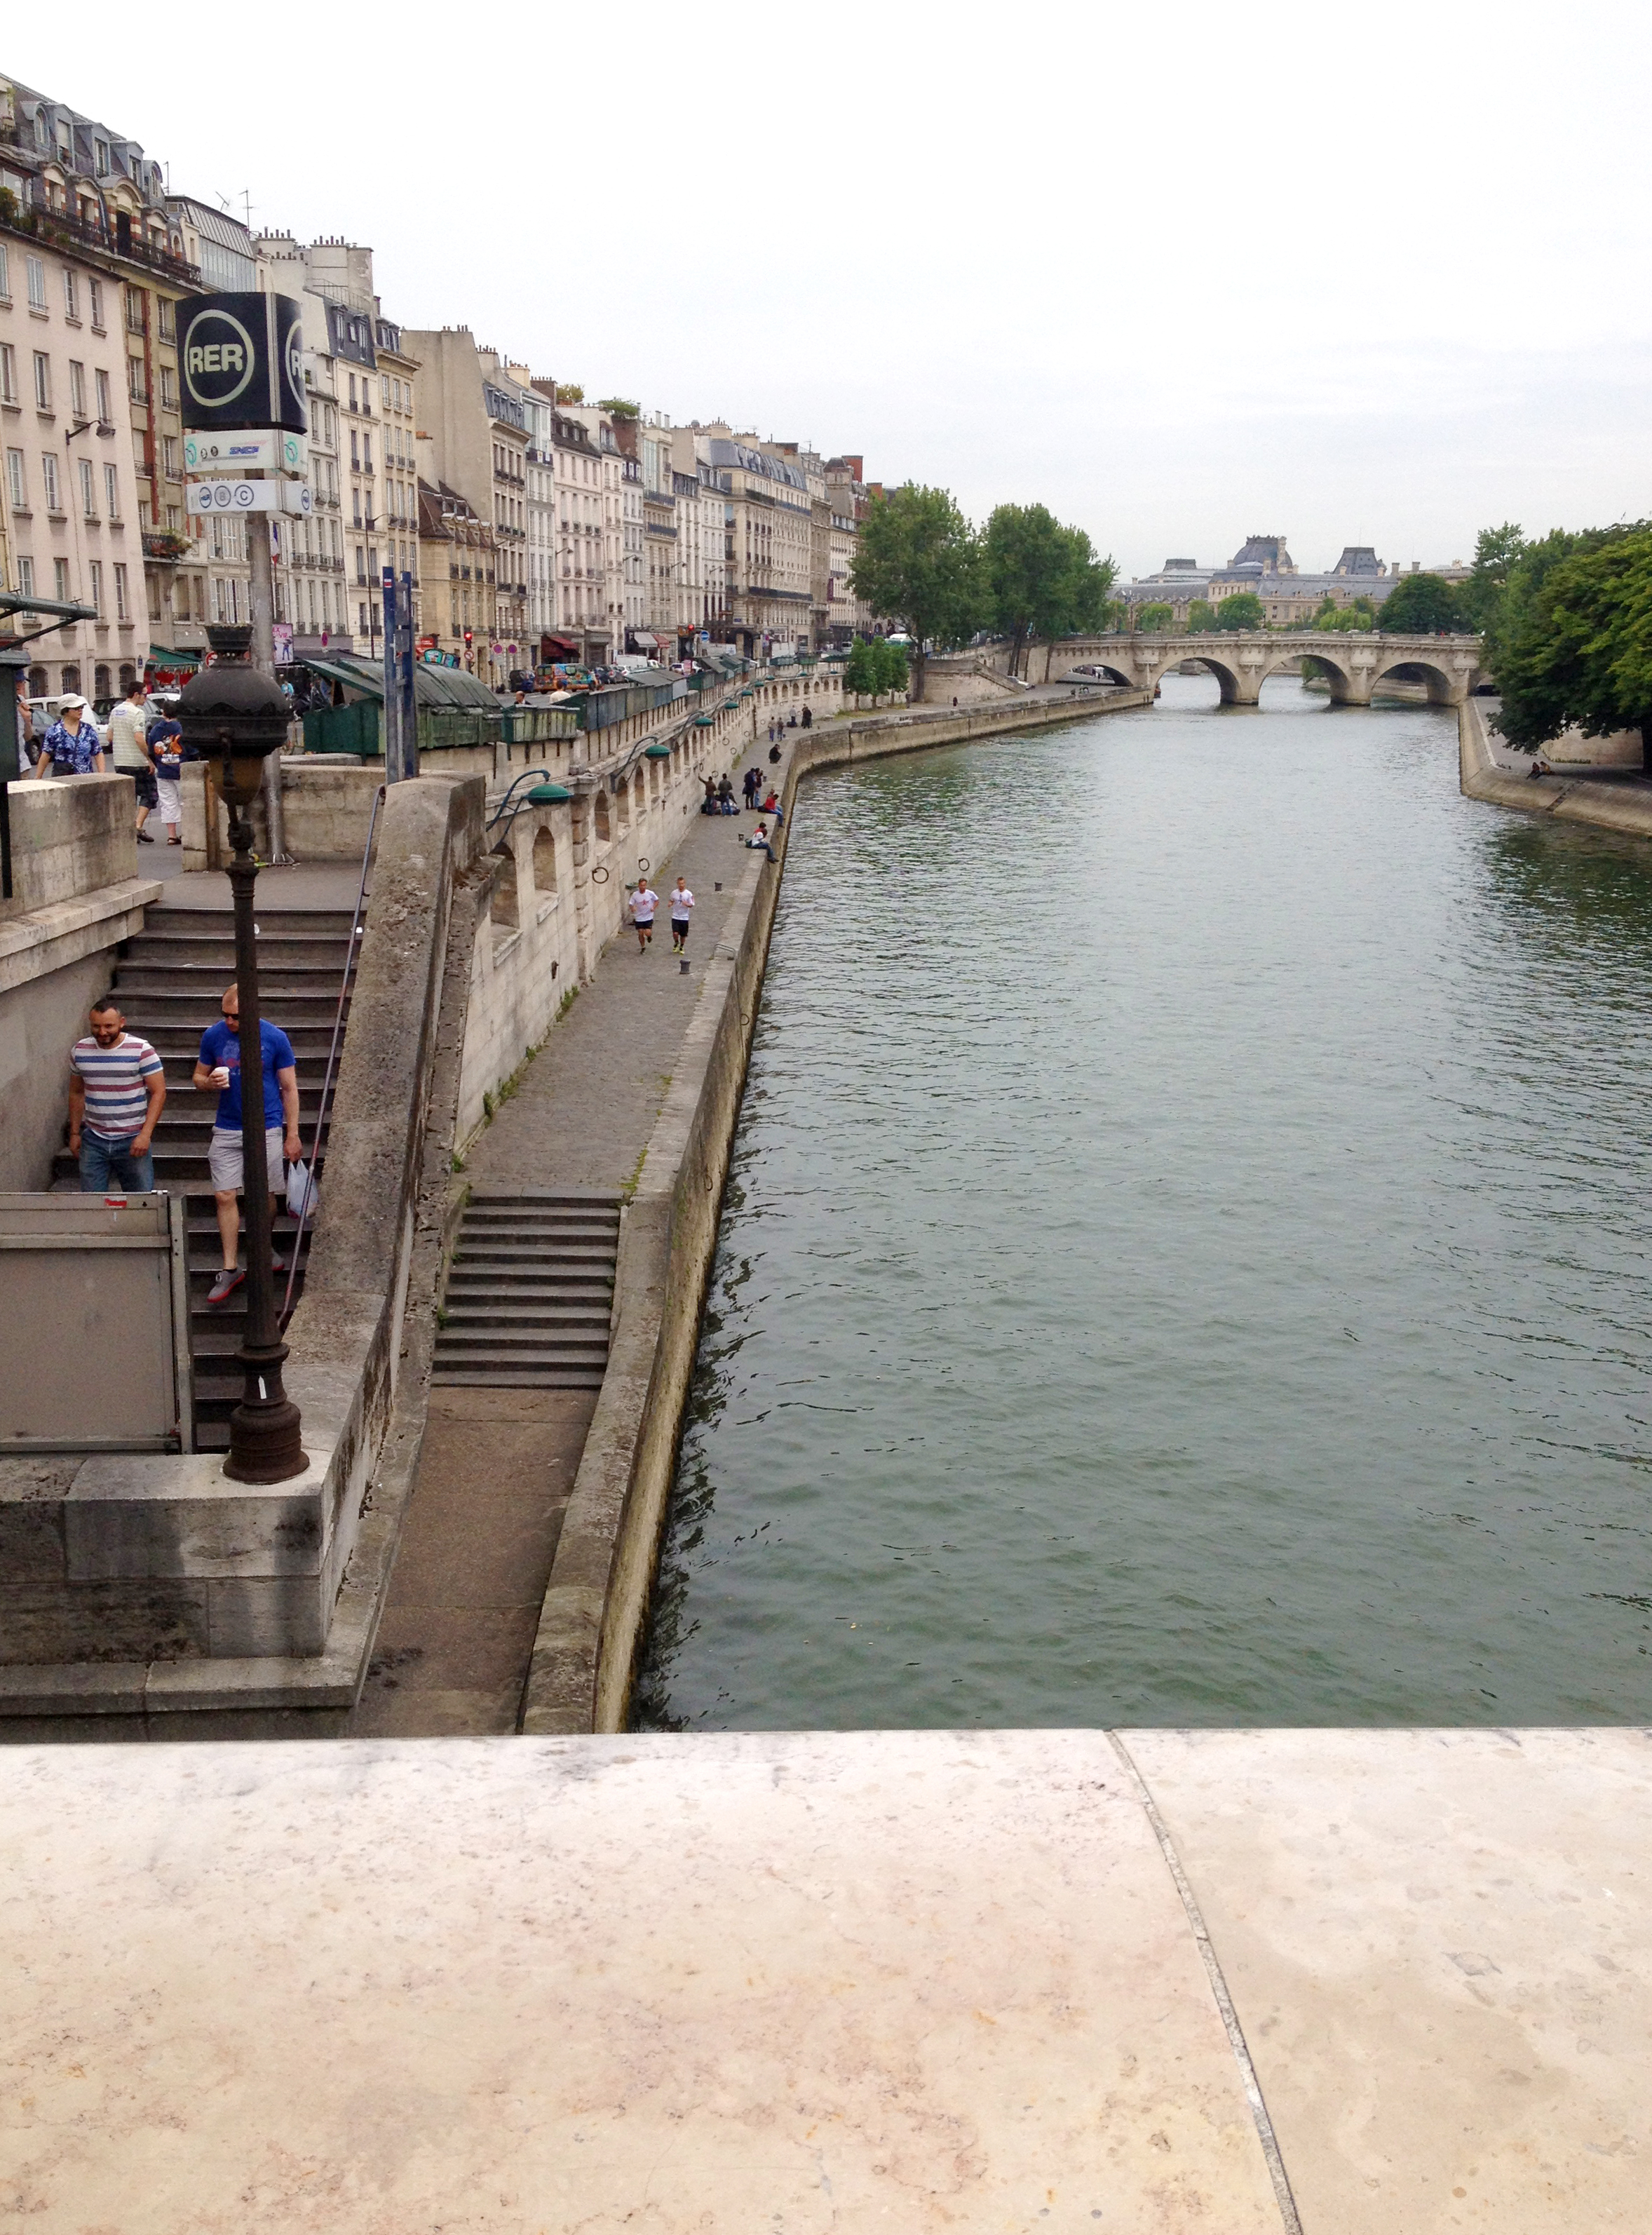  Looking down the Seine River 